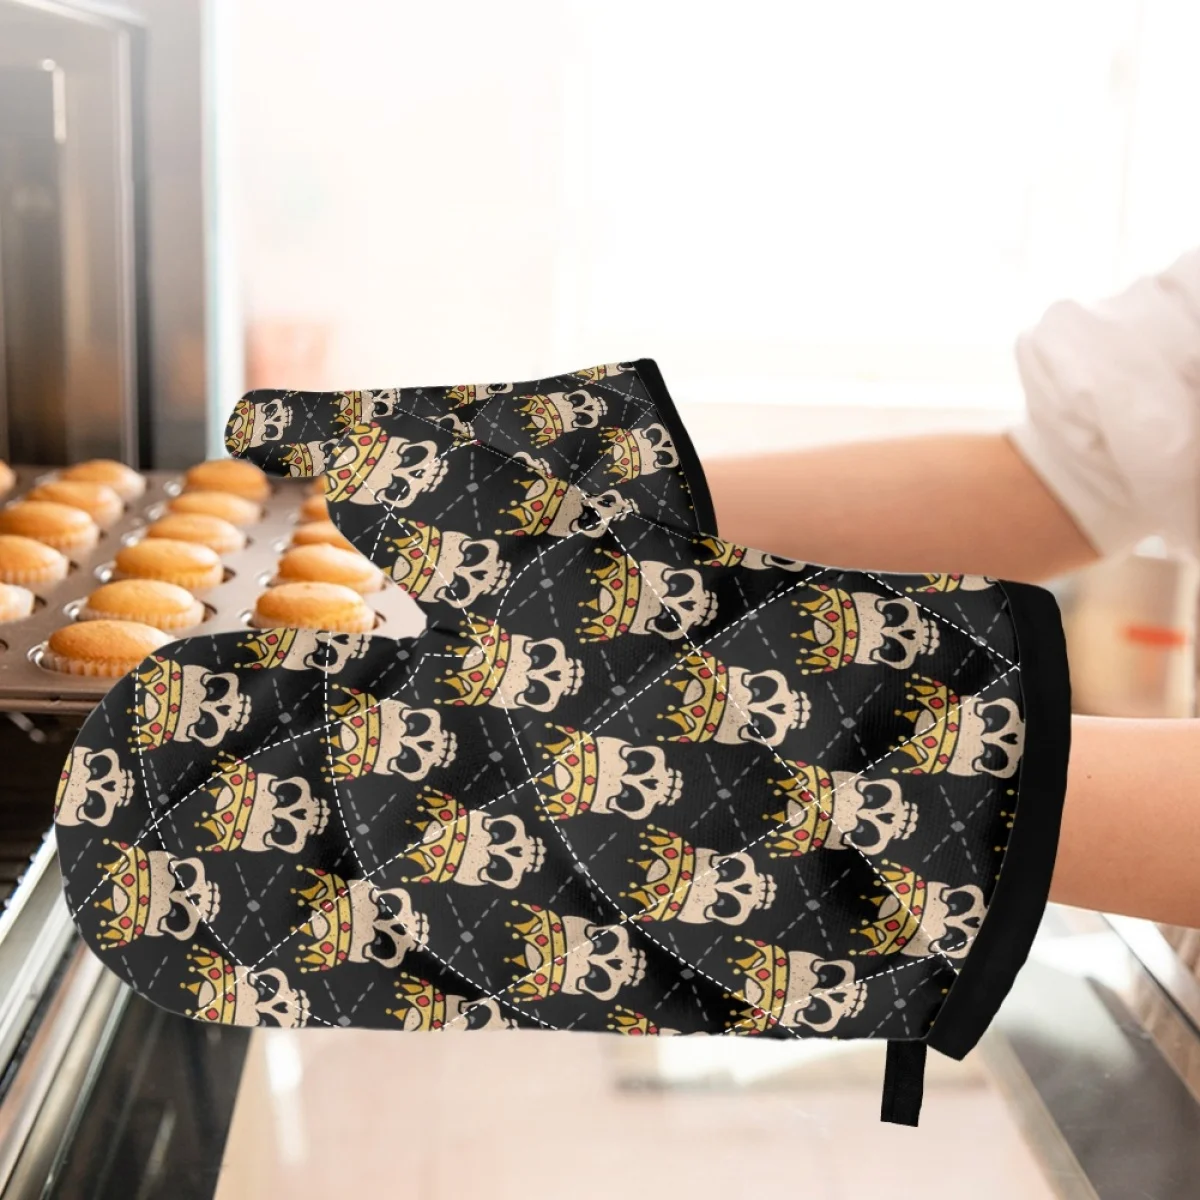 

TOADDMOS Crown Skull Pattern Anti-scalding Oven Gloves Cotton Microwave Mitts Pot Holder Set For BBQ Cooking Soup Baking Supplie